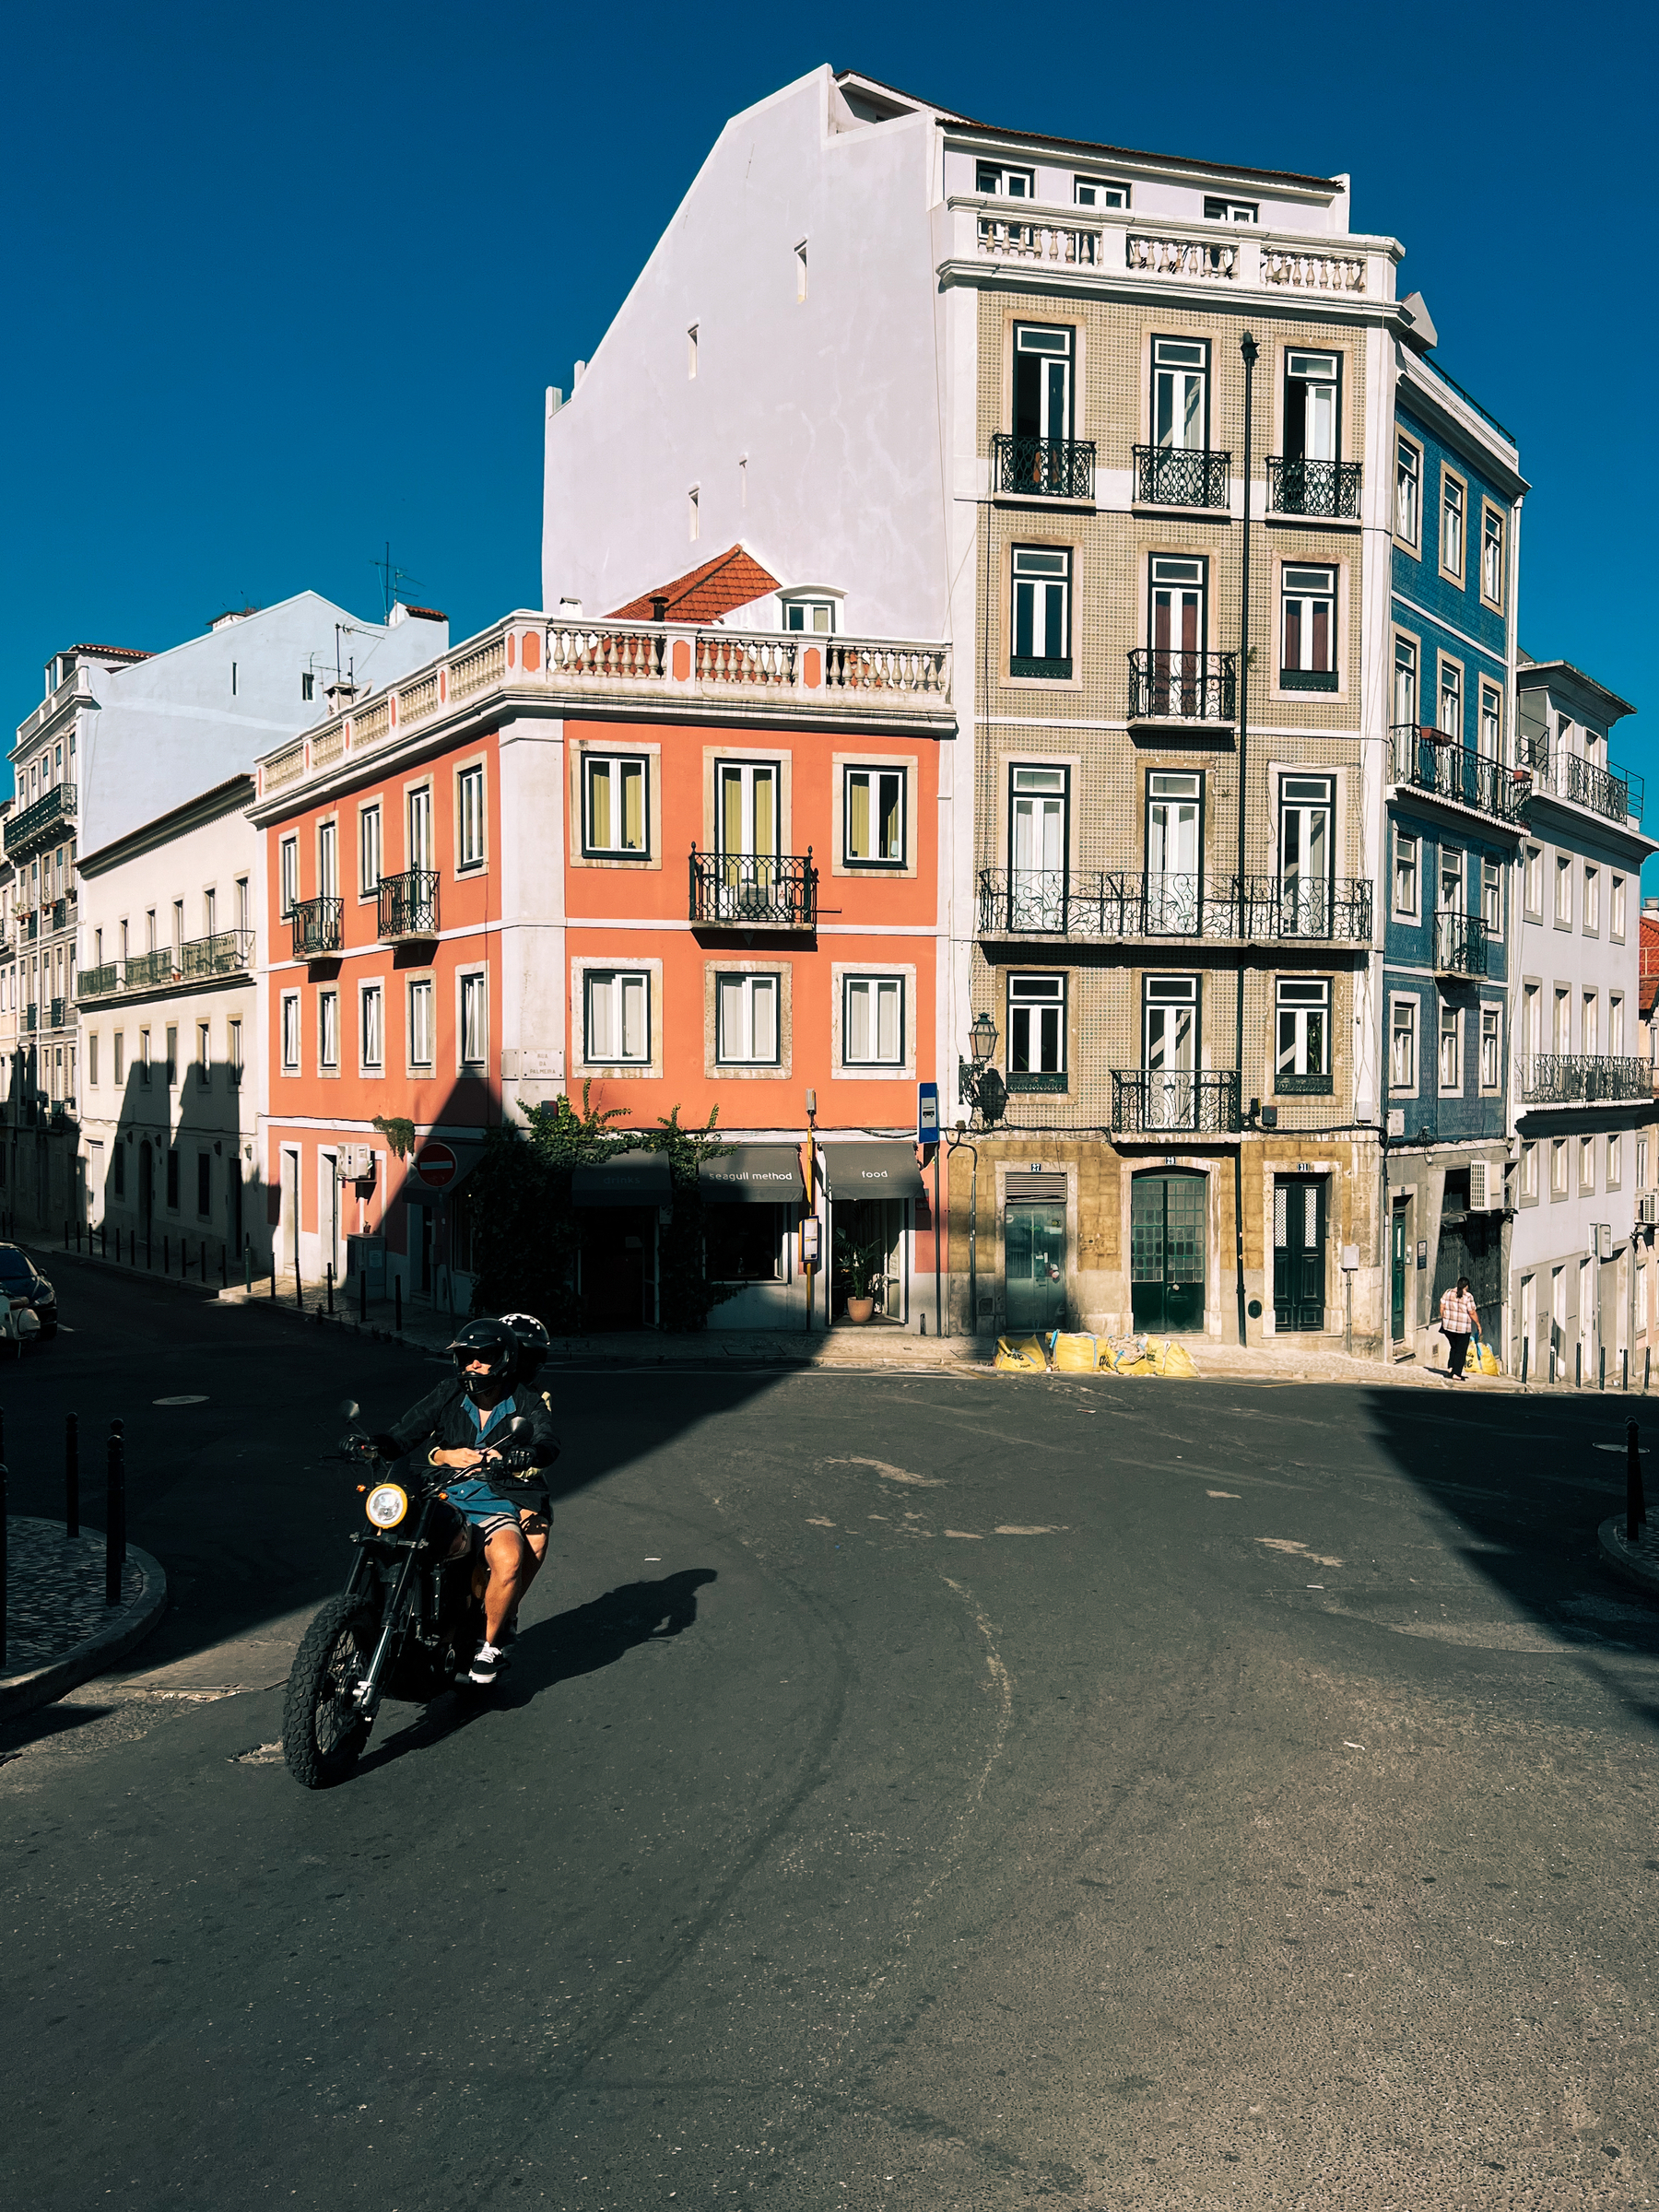 A motorcycle rides by in downtown Lisbon. Old, colorful, buildings. 